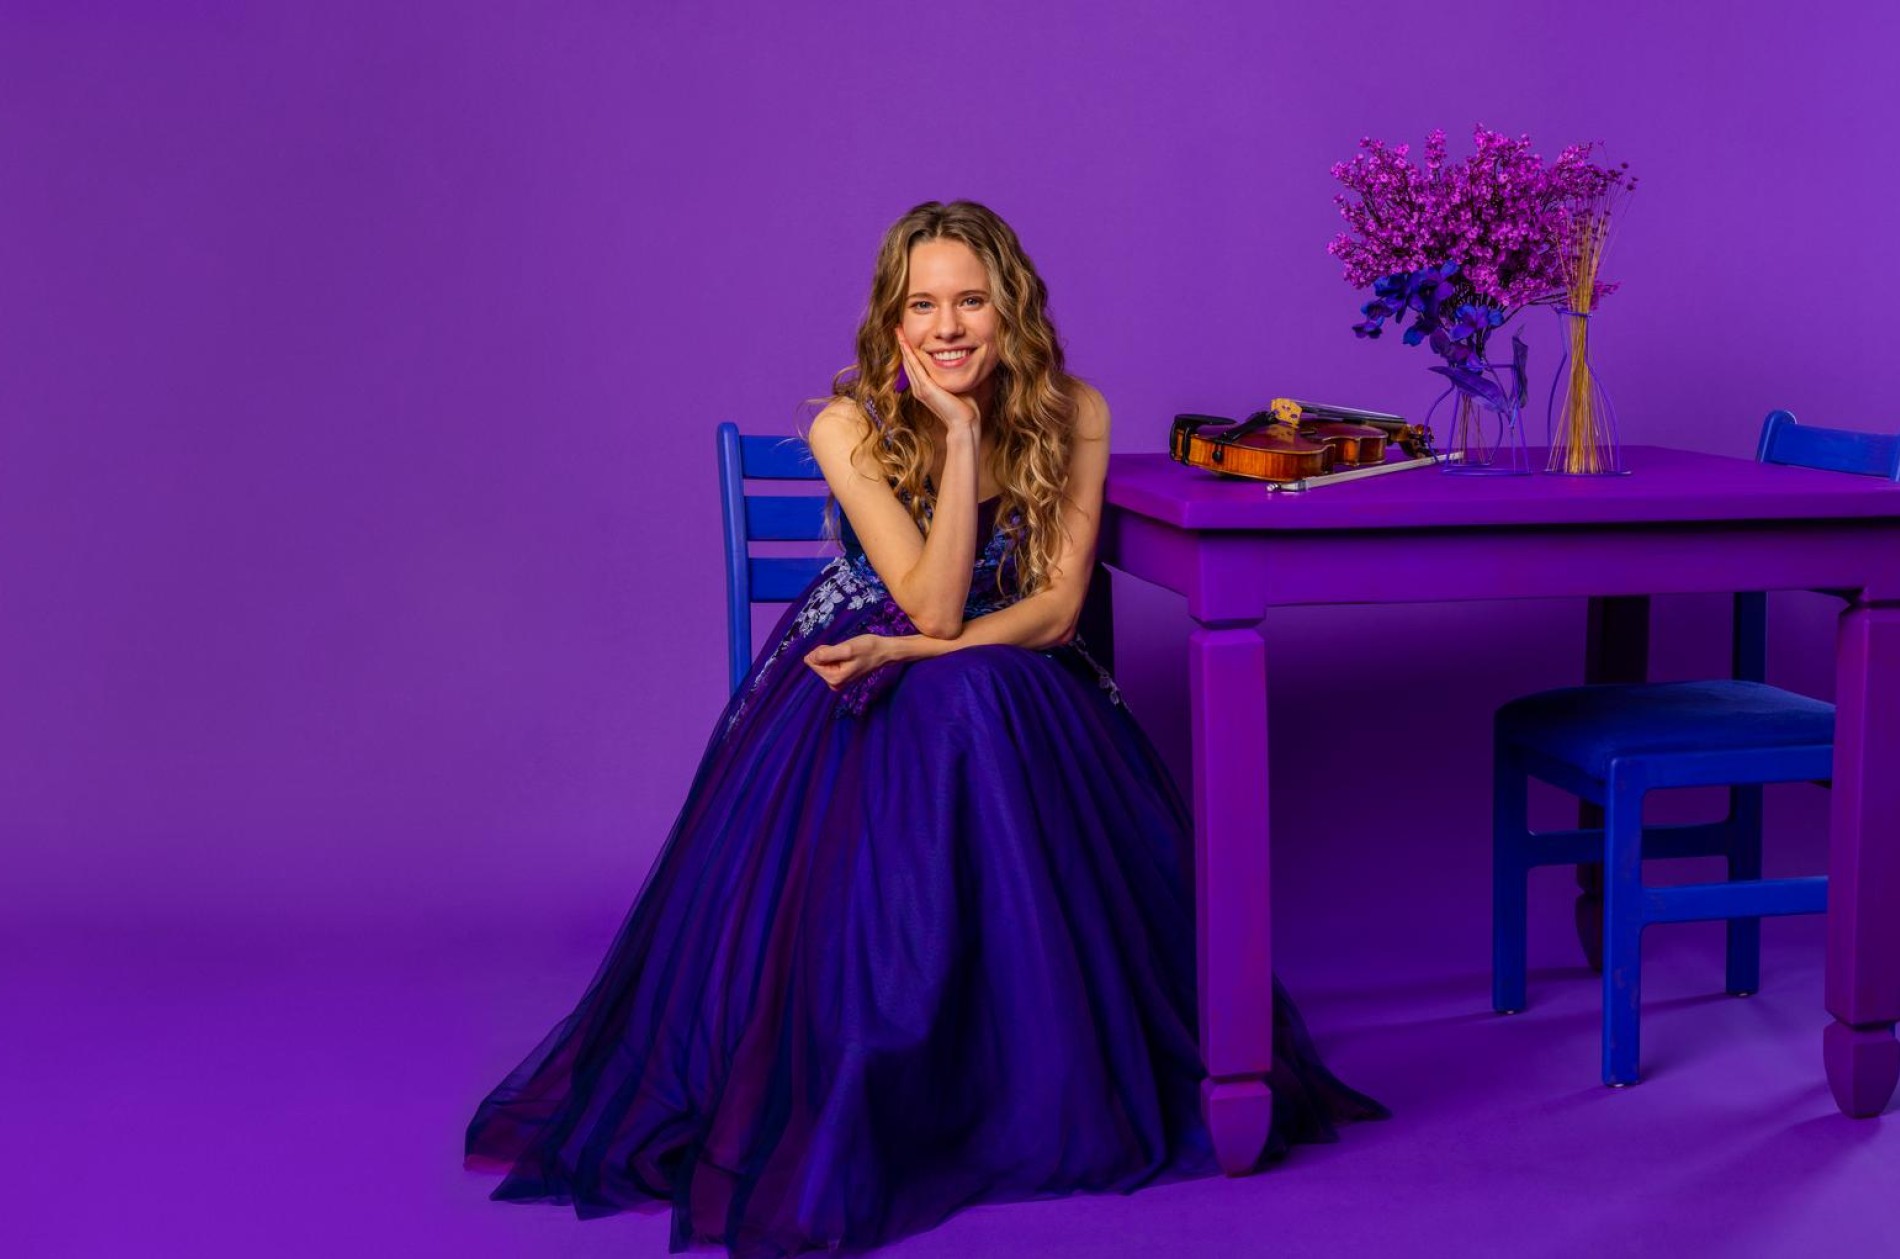 A monochromatic image of a violinist in a purple gown sitting beside her instrument upon a purple table on a purple ground beside a purple wall.